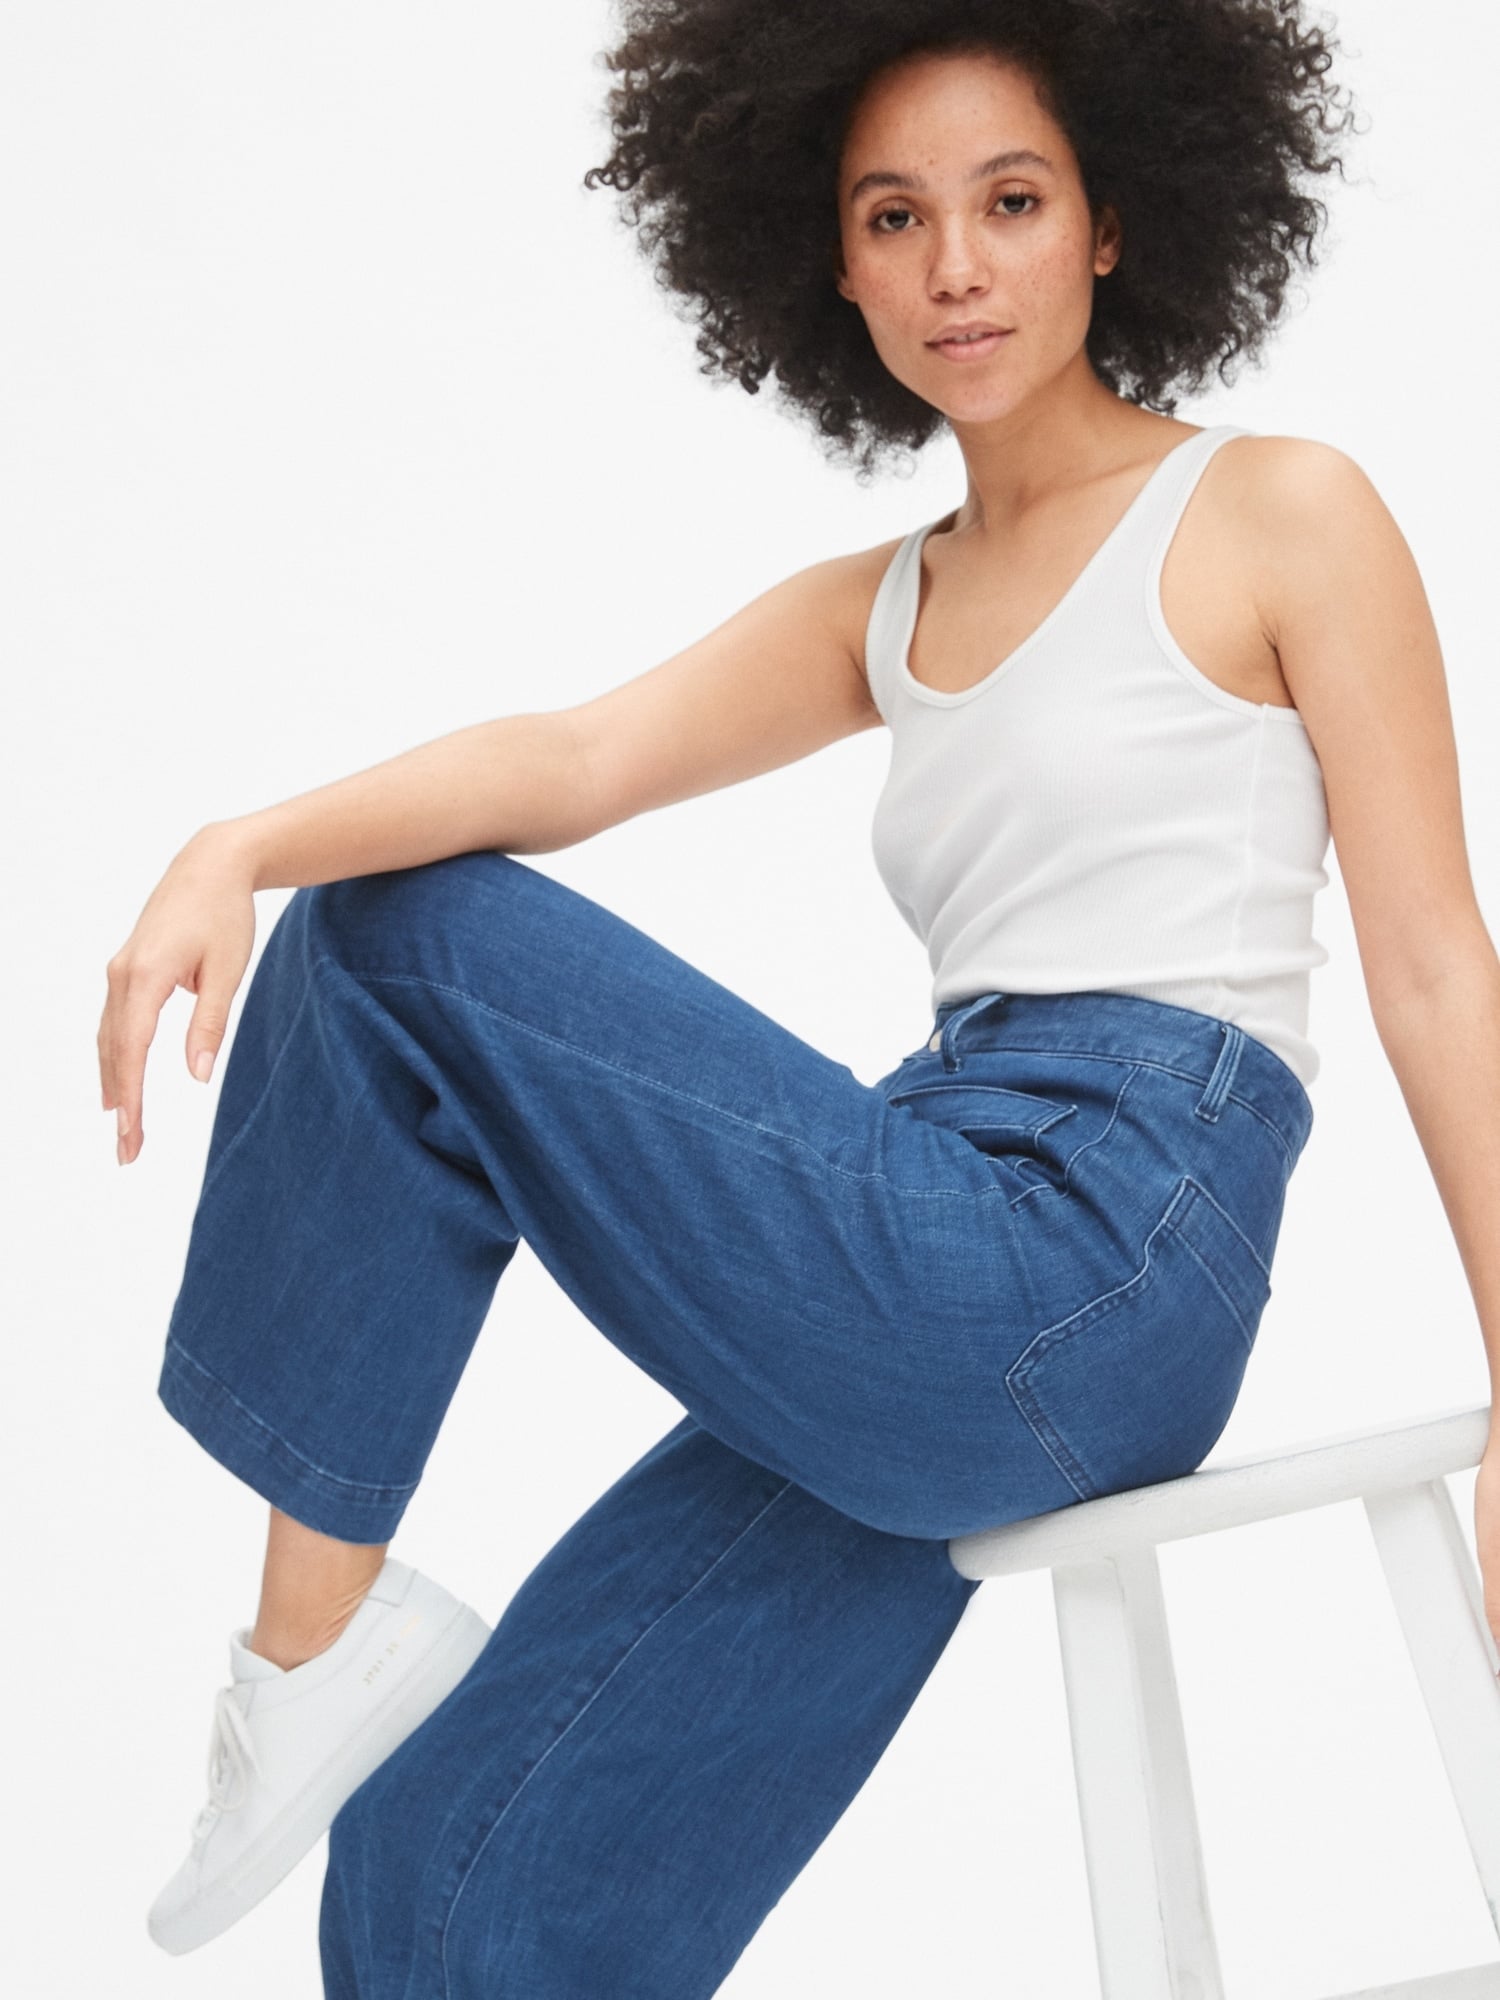 High-Waisted Sailor Jeans From Gap